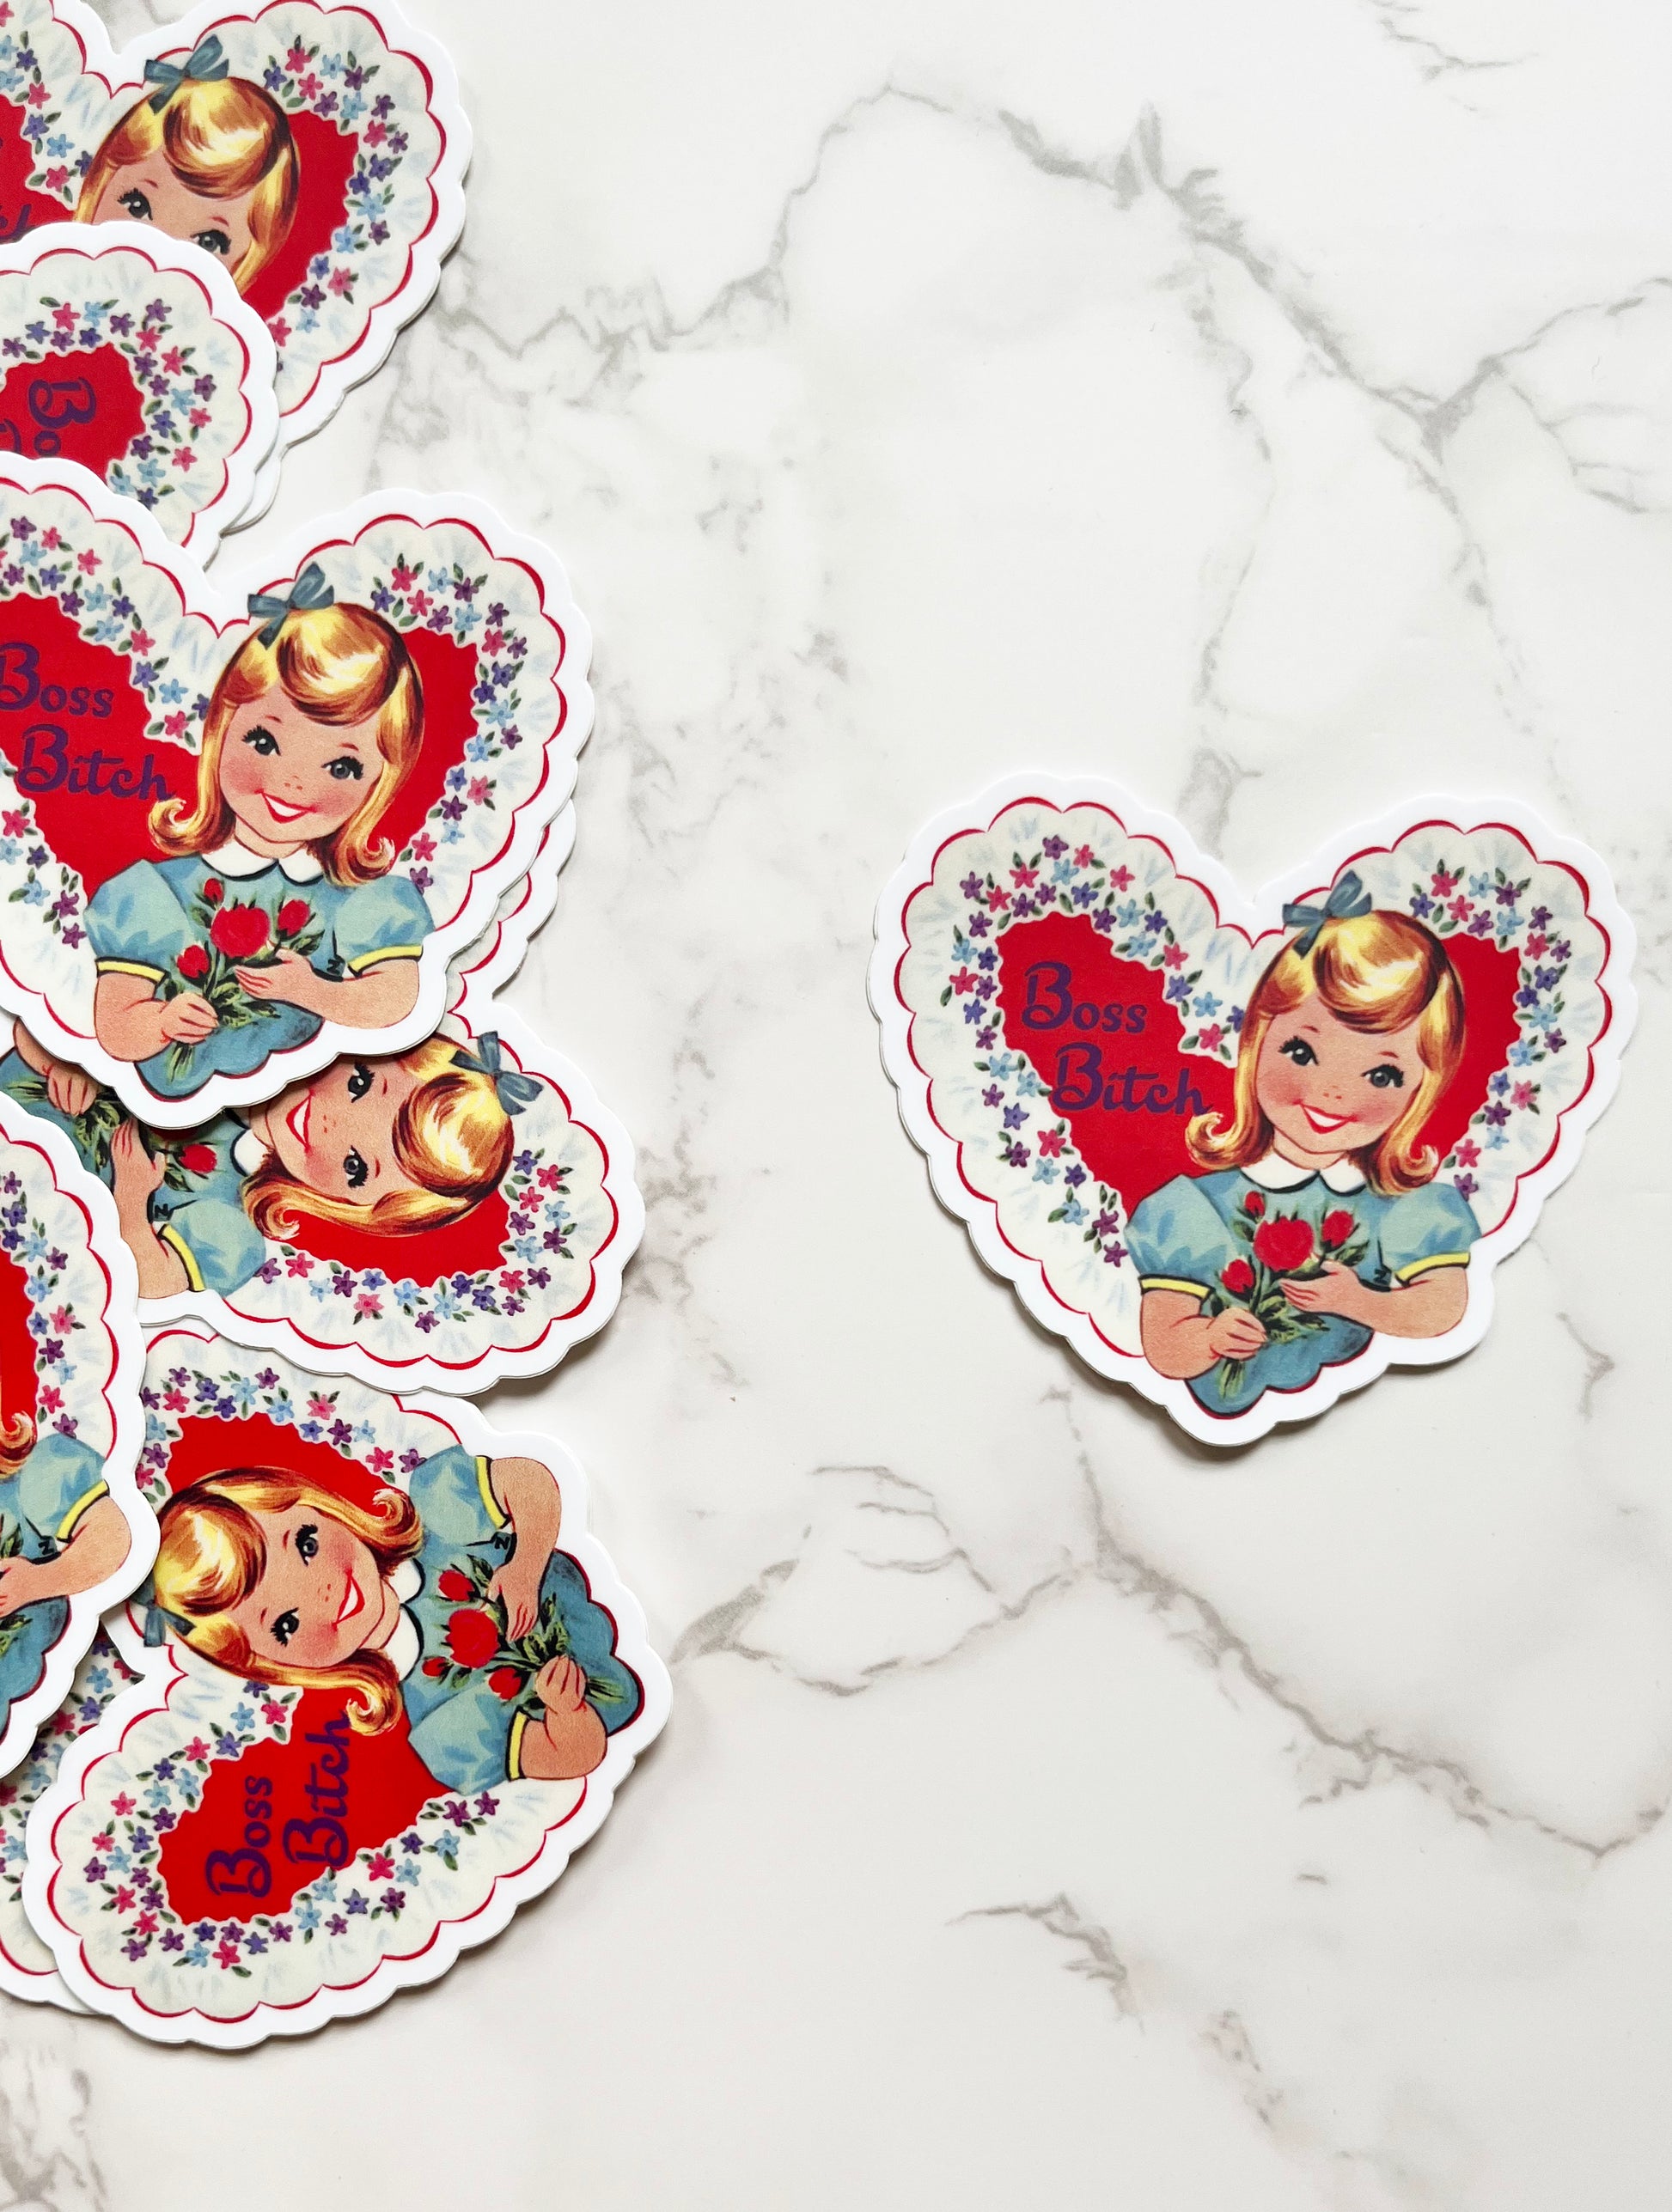 boss bitch sticker cute vintage girl with flowers and heart shaped sticker funny decal coin laundry fun sticker vintage style valentine girlboss 